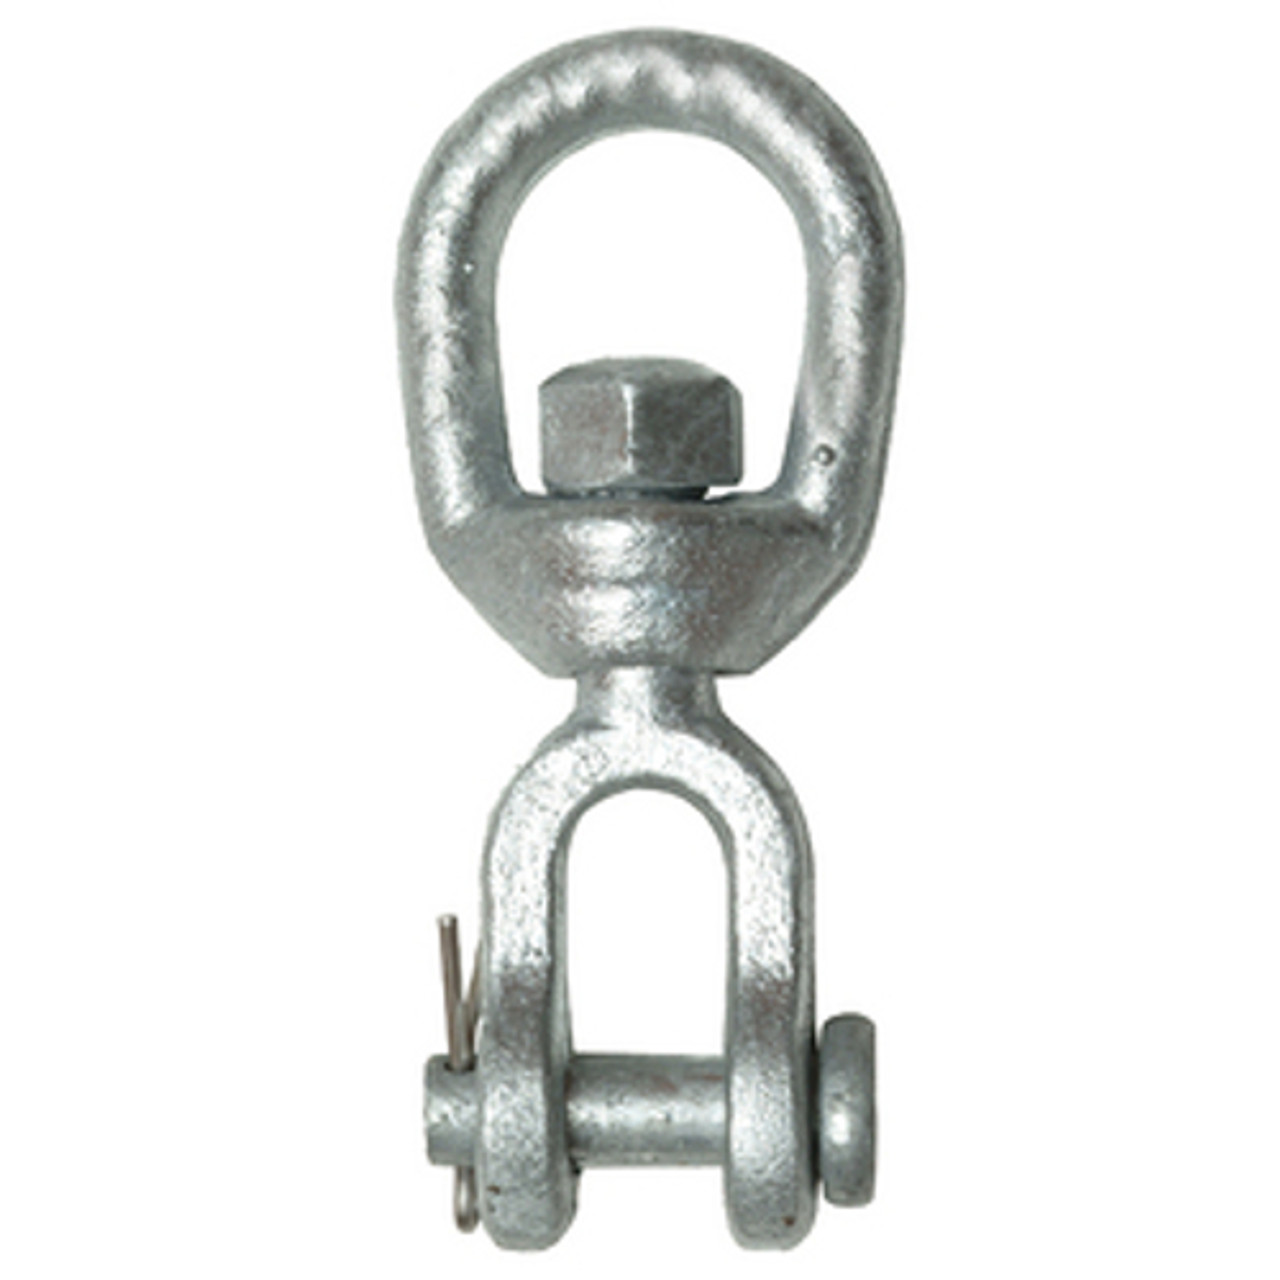 5/8 Inch Galvanized Jaw to Eye Swivel for Boats 26,000 lbs Breaking Strength